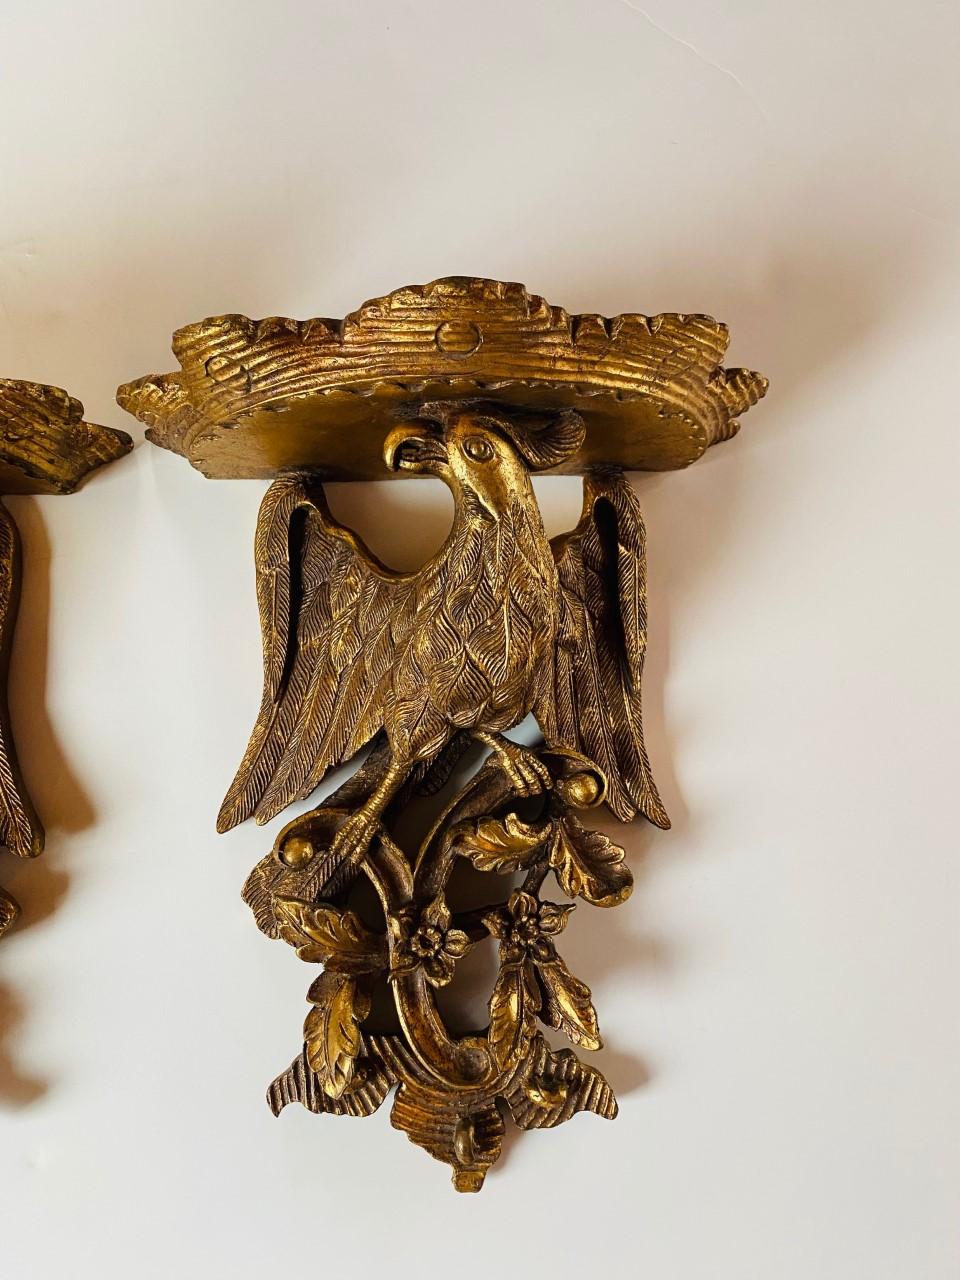 British Antique Pair of Imperial Eagle Carved Wall Shelf Sconce Brackets